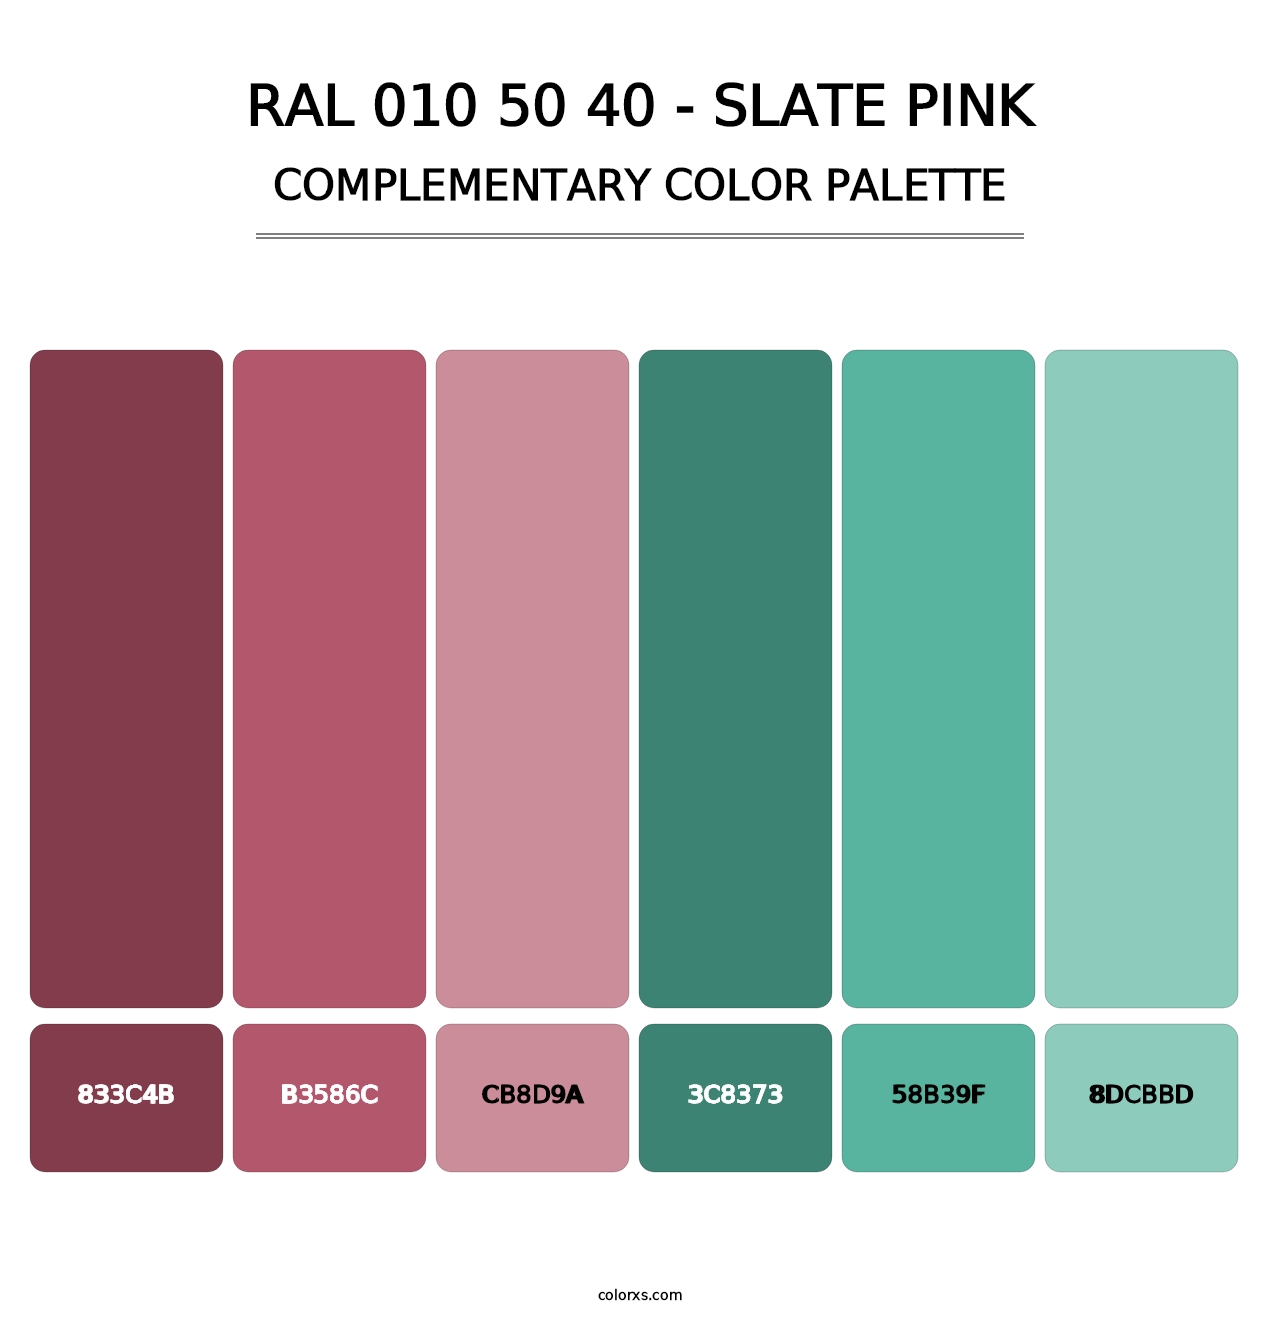 RAL 010 50 40 - Slate Pink - Complementary Color Palette